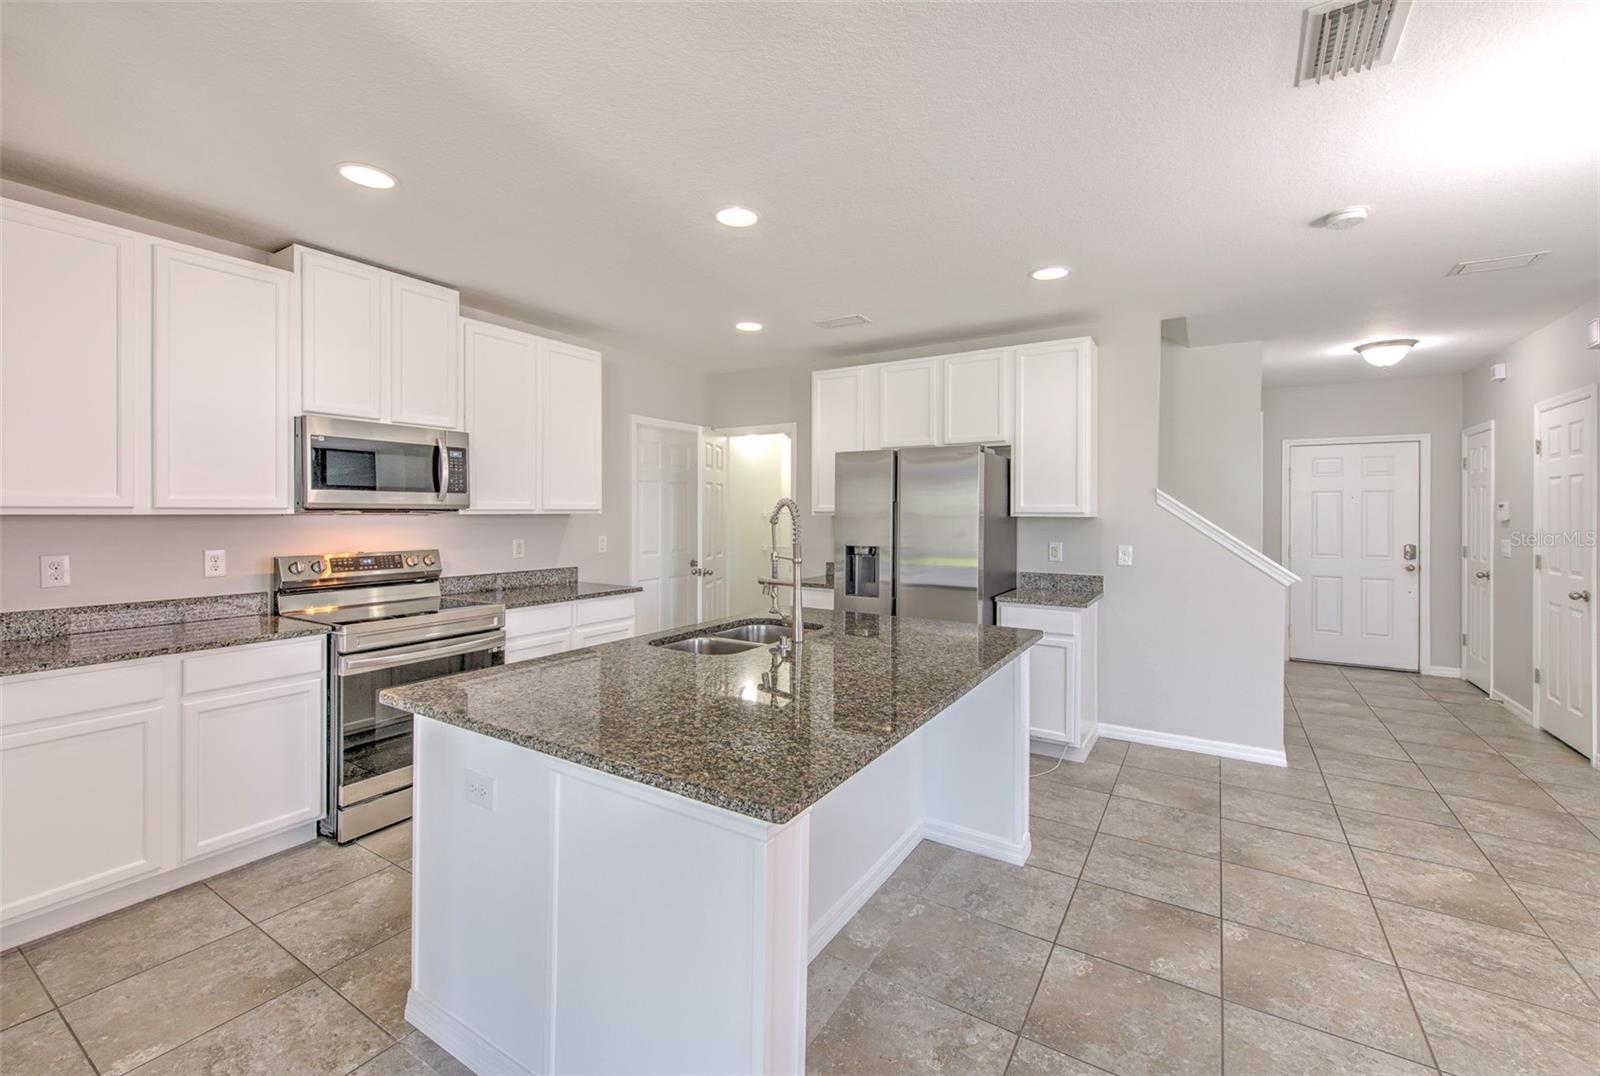 Kitchen with center island seating. Original kitchen appliances have been upgraded with stainless steel appliances. Granite counters with solid wood cabinetry.